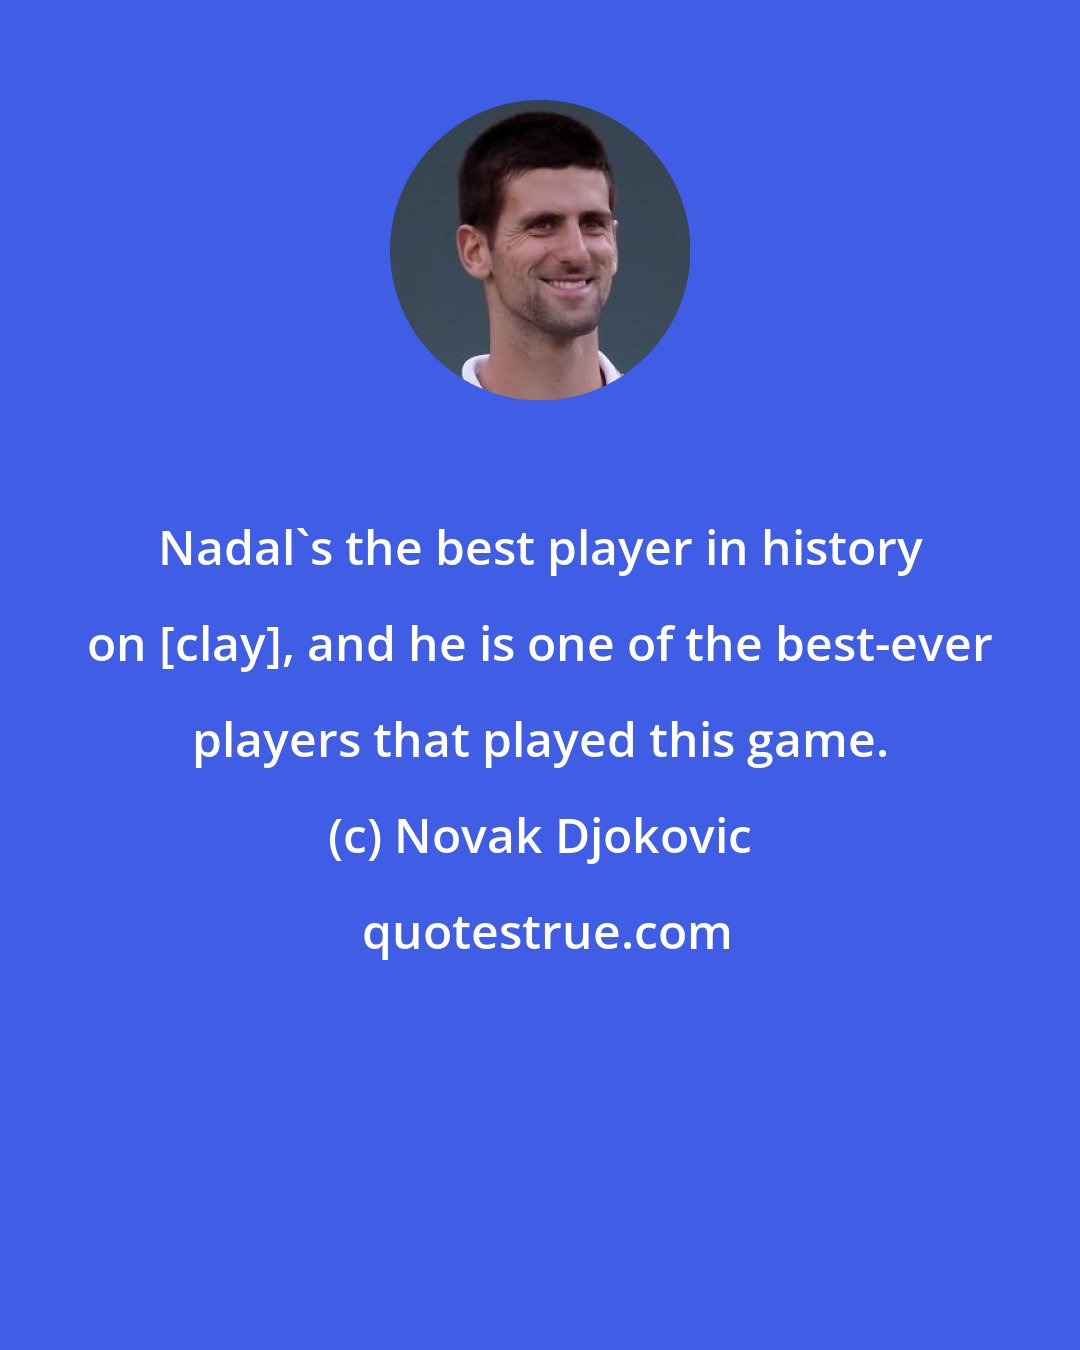 Novak Djokovic: Nadal's the best player in history on [clay], and he is one of the best-ever players that played this game.